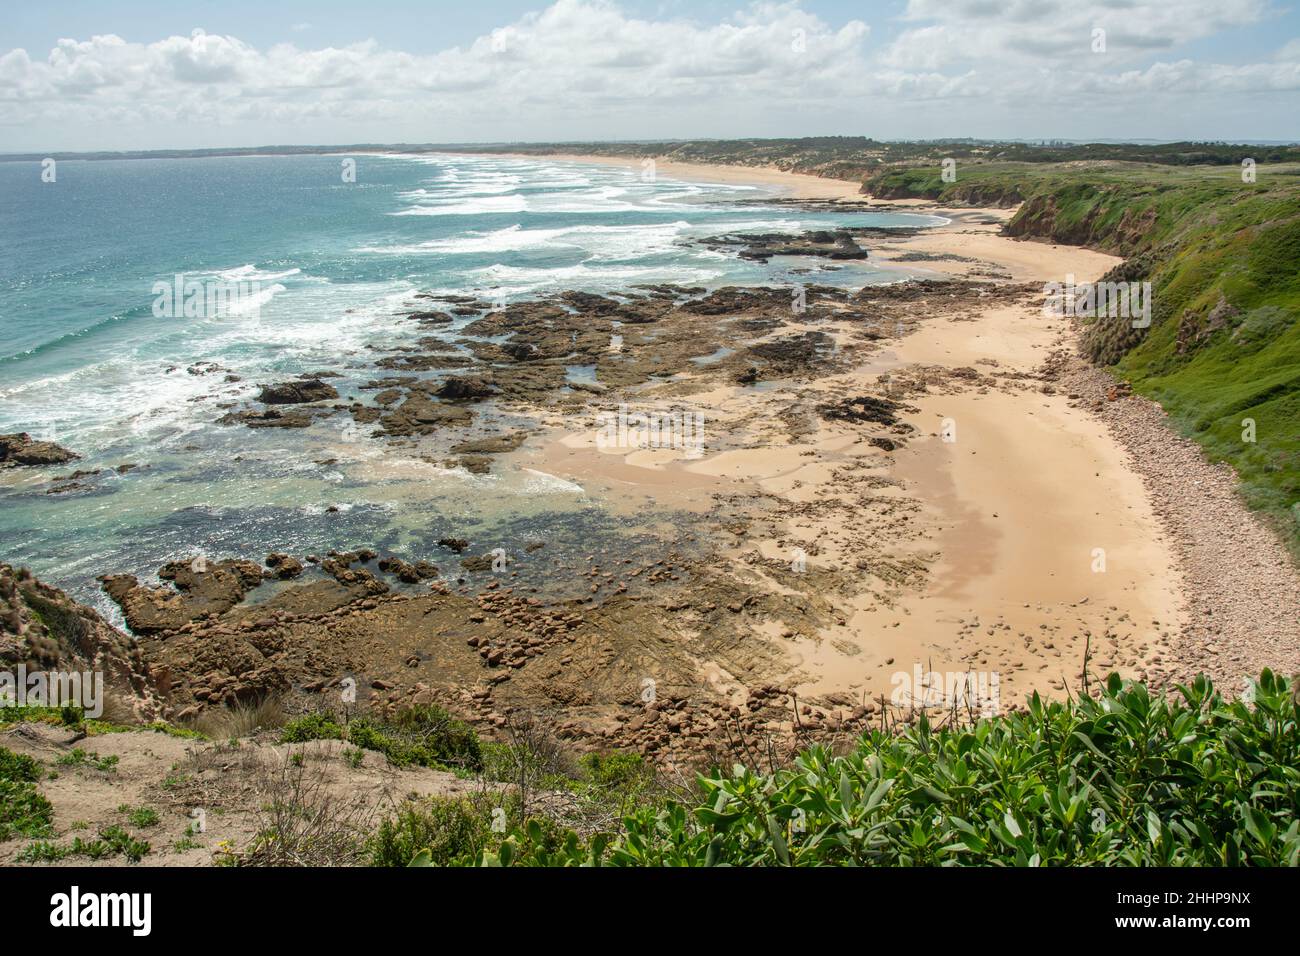 View of the Cape Woolamai Surf Beach and blue waters of the Bass Strait, Phillip Island, Victoria, Australia Stock Photo